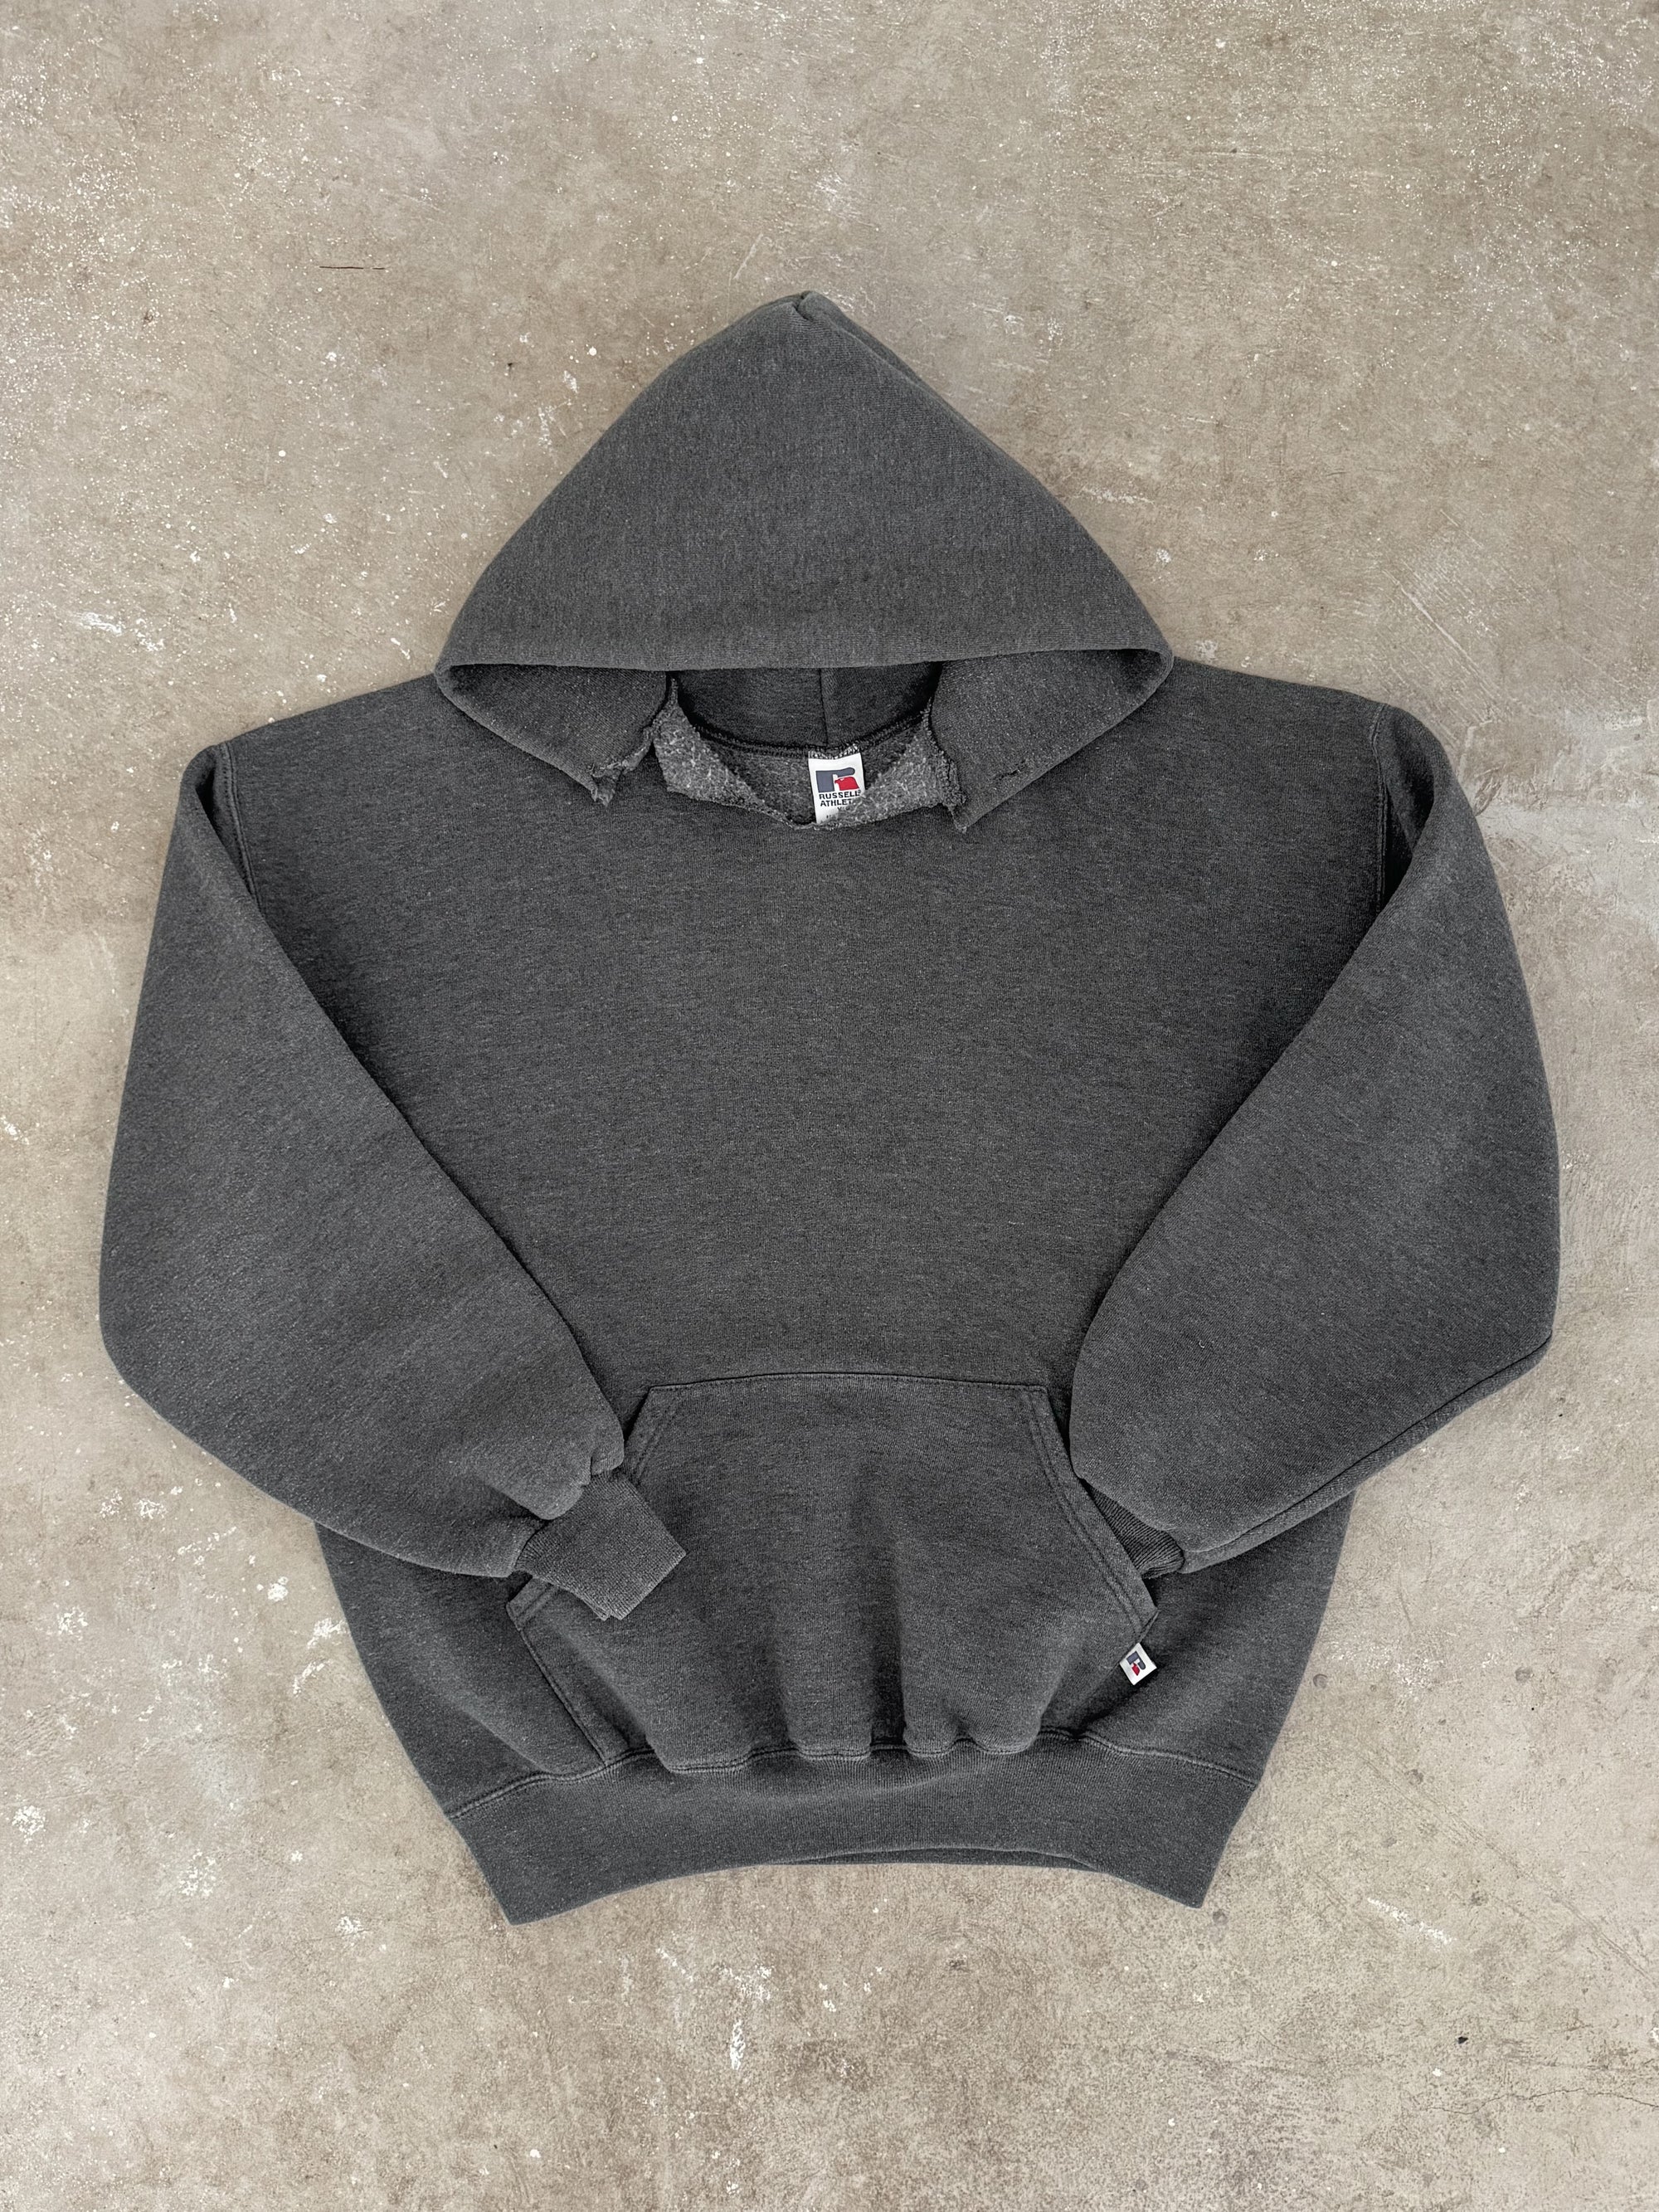 Early 00s Russell Distressed Charcoal Grey Hoodie (L)